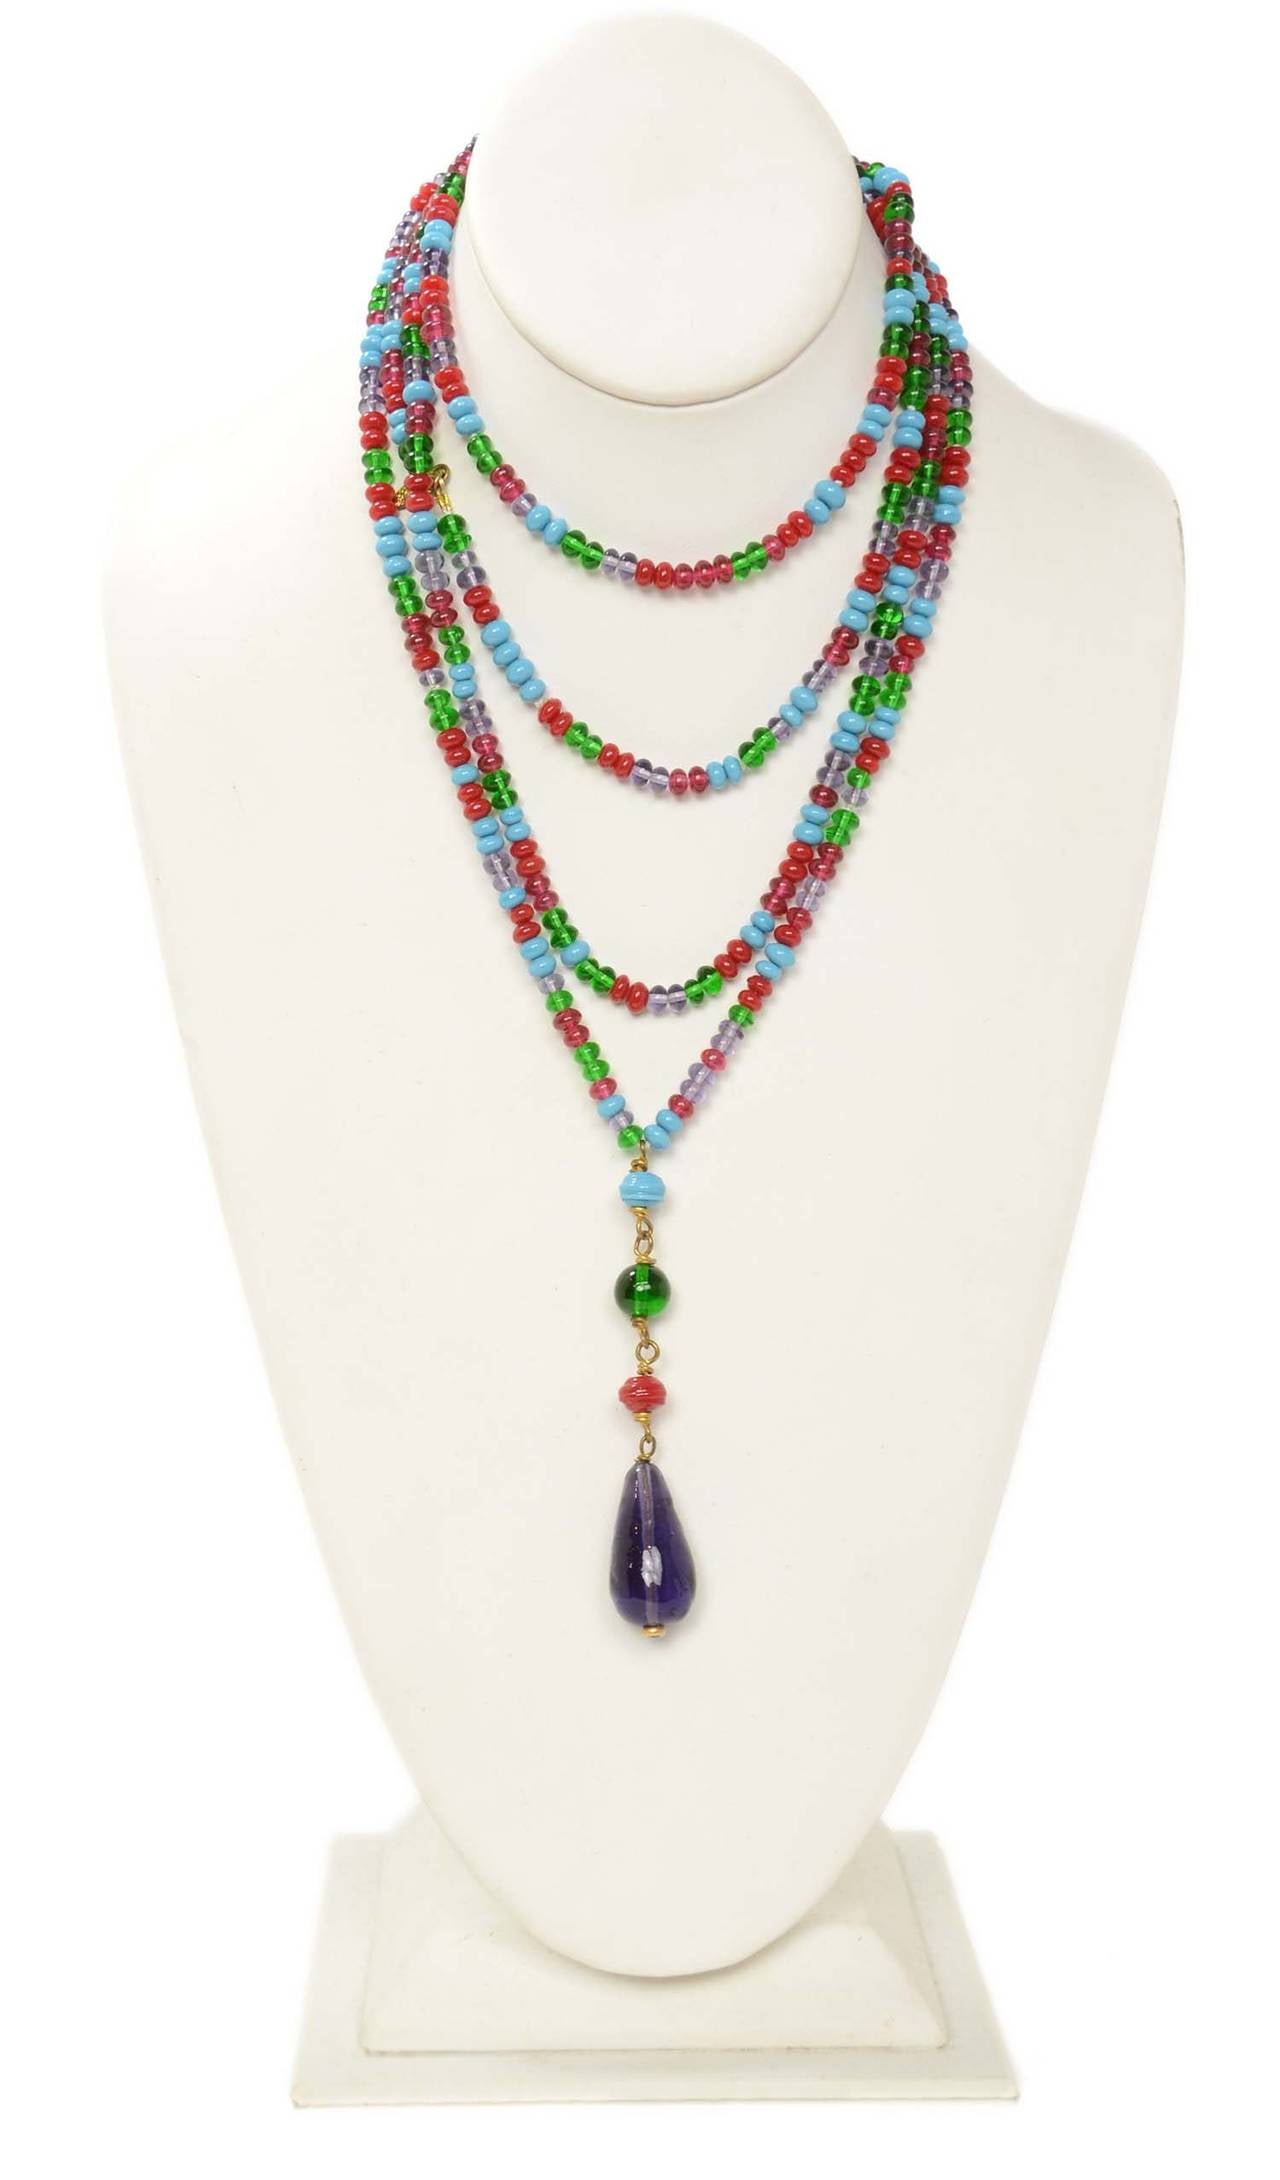 Chanel Vintage '94 Multi Colored Beaded NecklaceFeatures purple gripoix drop charm

    Made in: France
    Year of Production: 1994
    Stamp: 94 CC P
    Closure: Pull over
    Color: Turquoise, red, purple, green, and brass
    Materials: